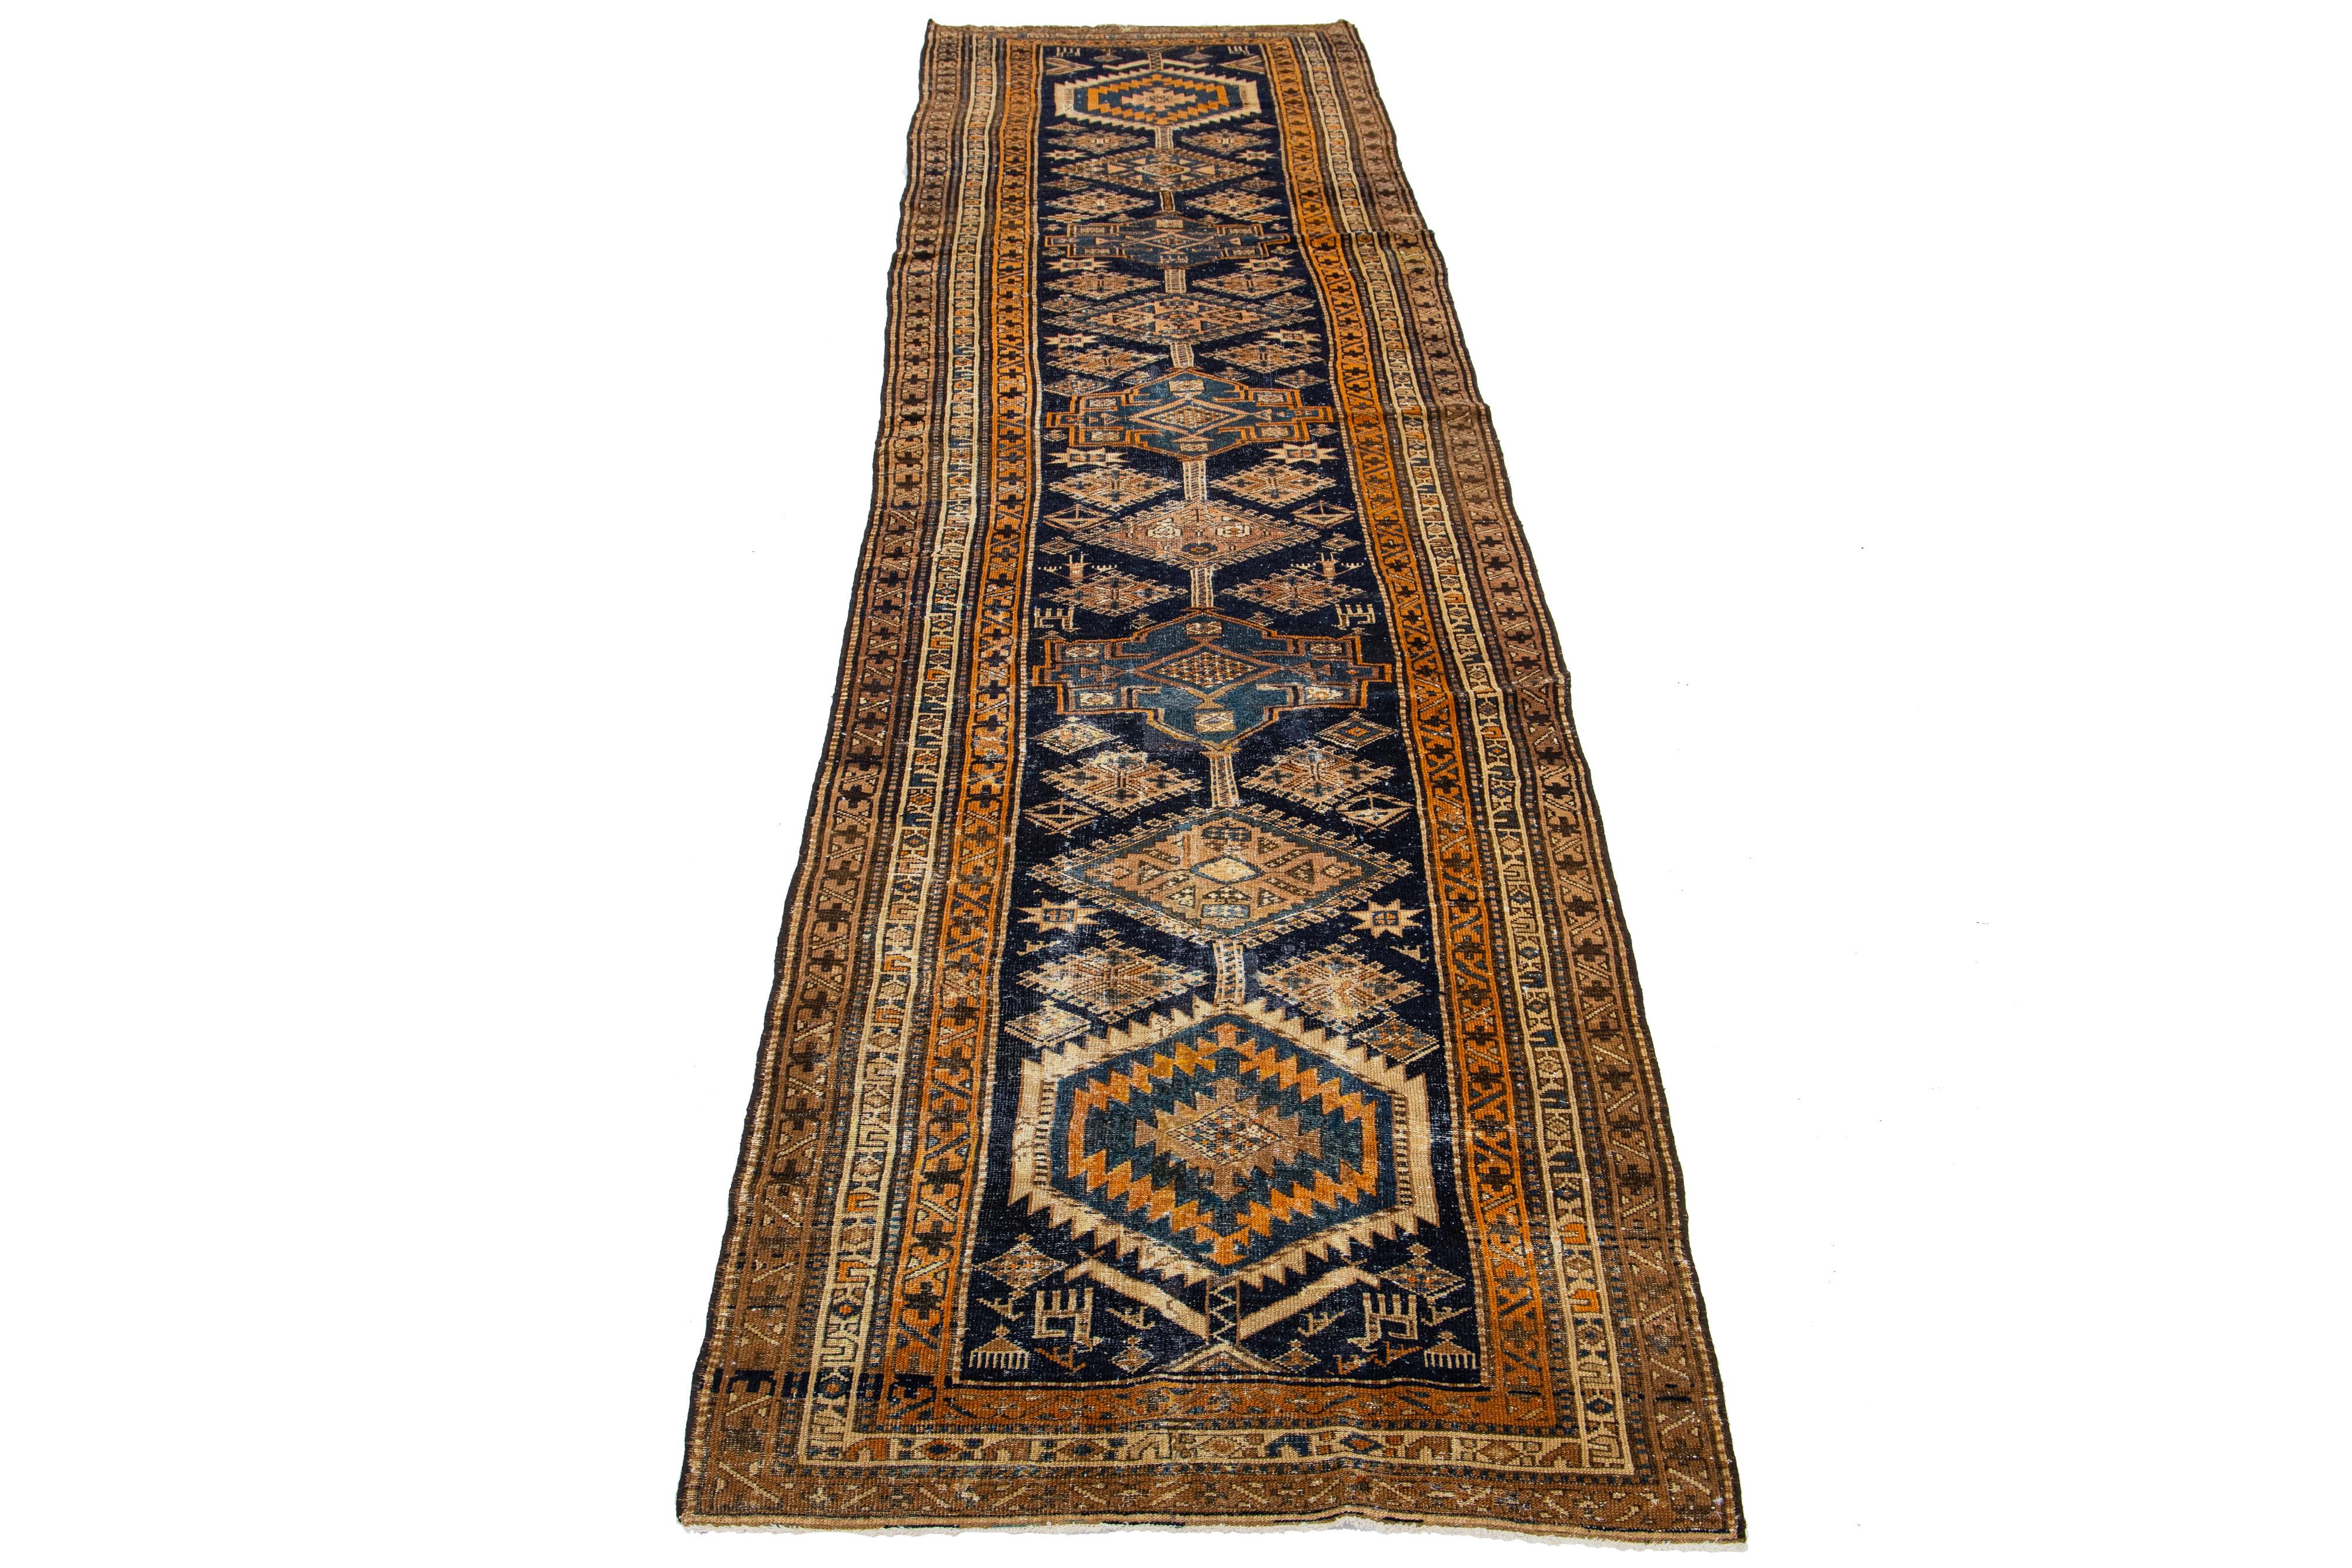 Beautiful 20th-century Heriz hand-knotted wool runner with a dark blue color field. This Piece has multicolor accents in a gorgeous tribal design.

This rug measures 3'5